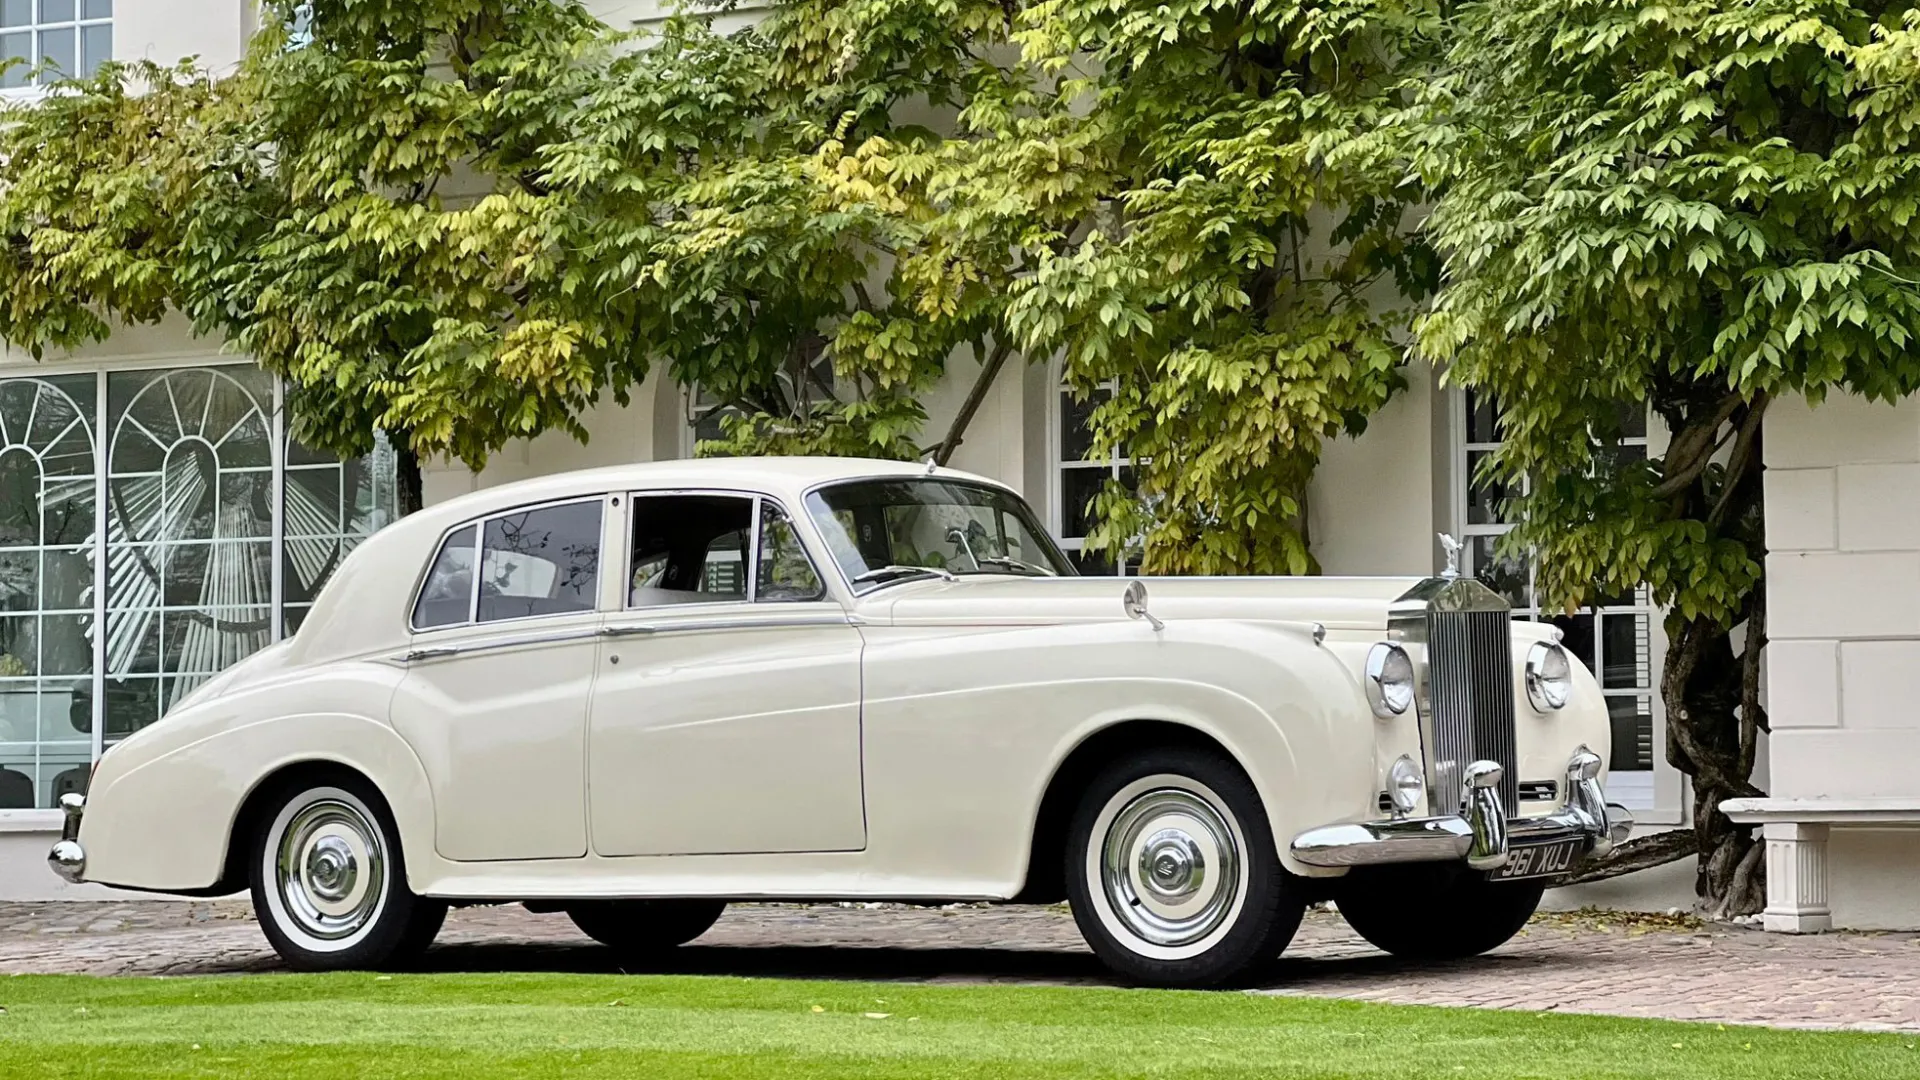 Side view of ivory Classic Rolls-Royce Silver Cloud in front of venue with Green ivy covering the wall